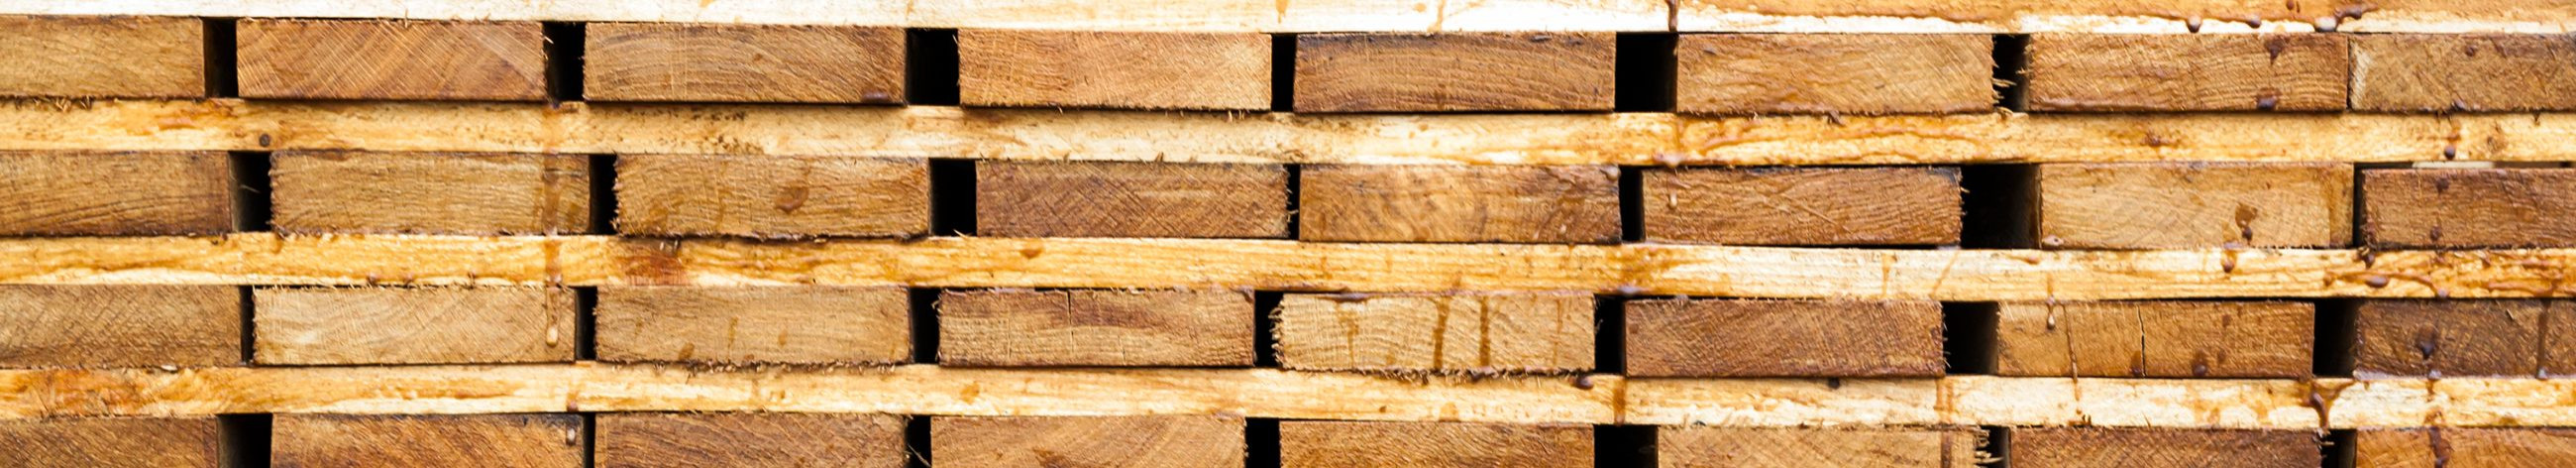 sale of wooden pallets, purchase and sale of lumber, sale of ports and covers, buying up of pallets and ports, manufacture of new pallets, wooden cargo boxes, repair of wooden pallets, rental of wooden pallets, heat treatment, timber buying and selling